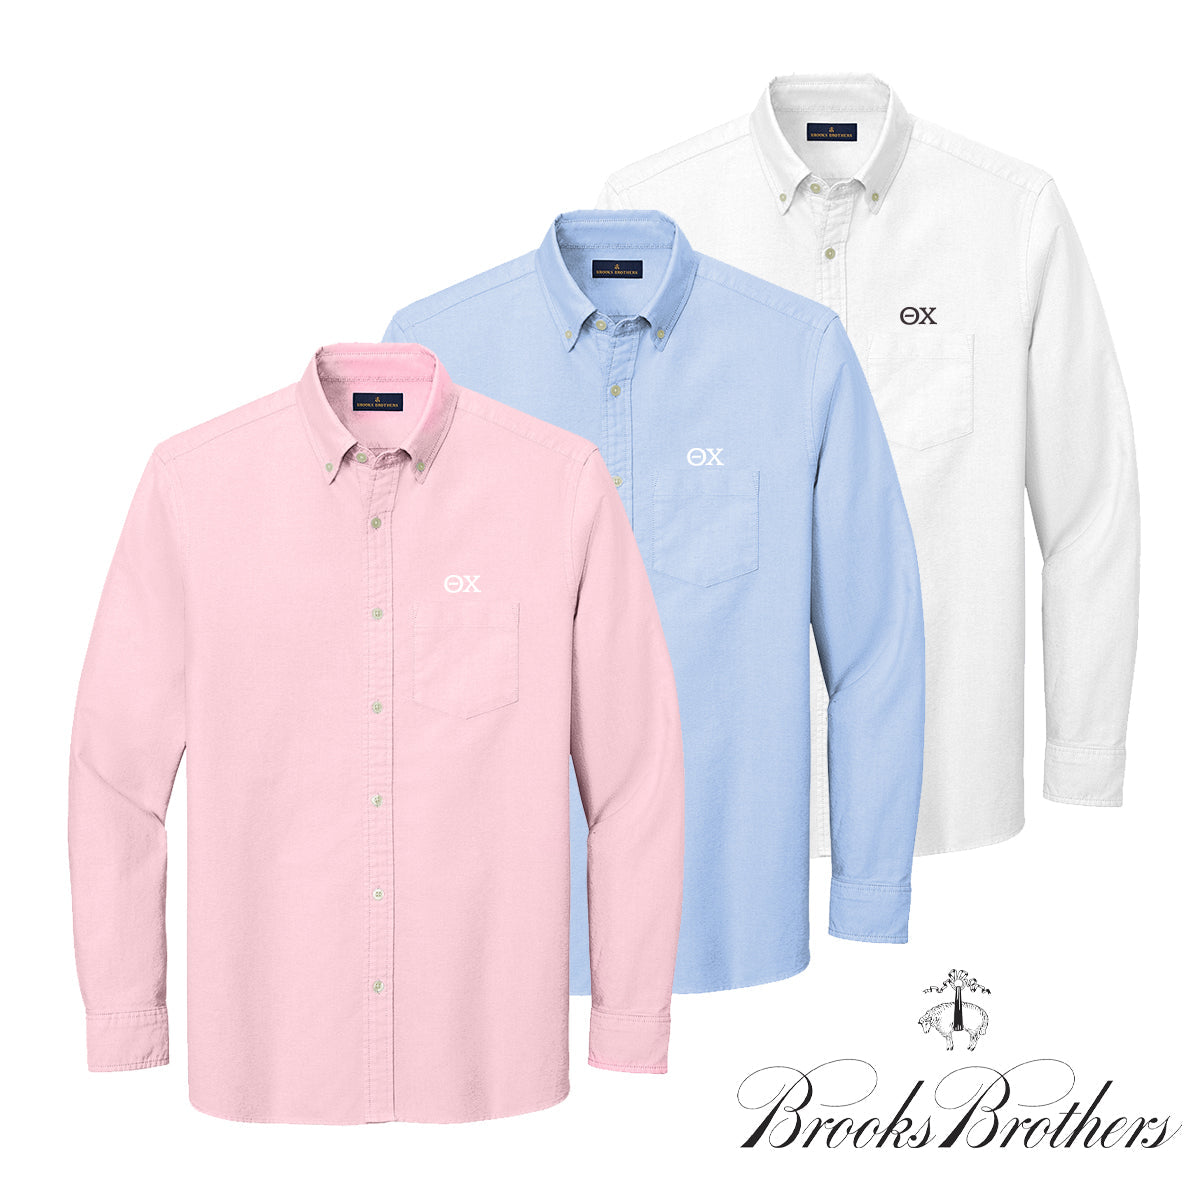 Theta Chi Brooks Brothers Oxford Button Up Shirt